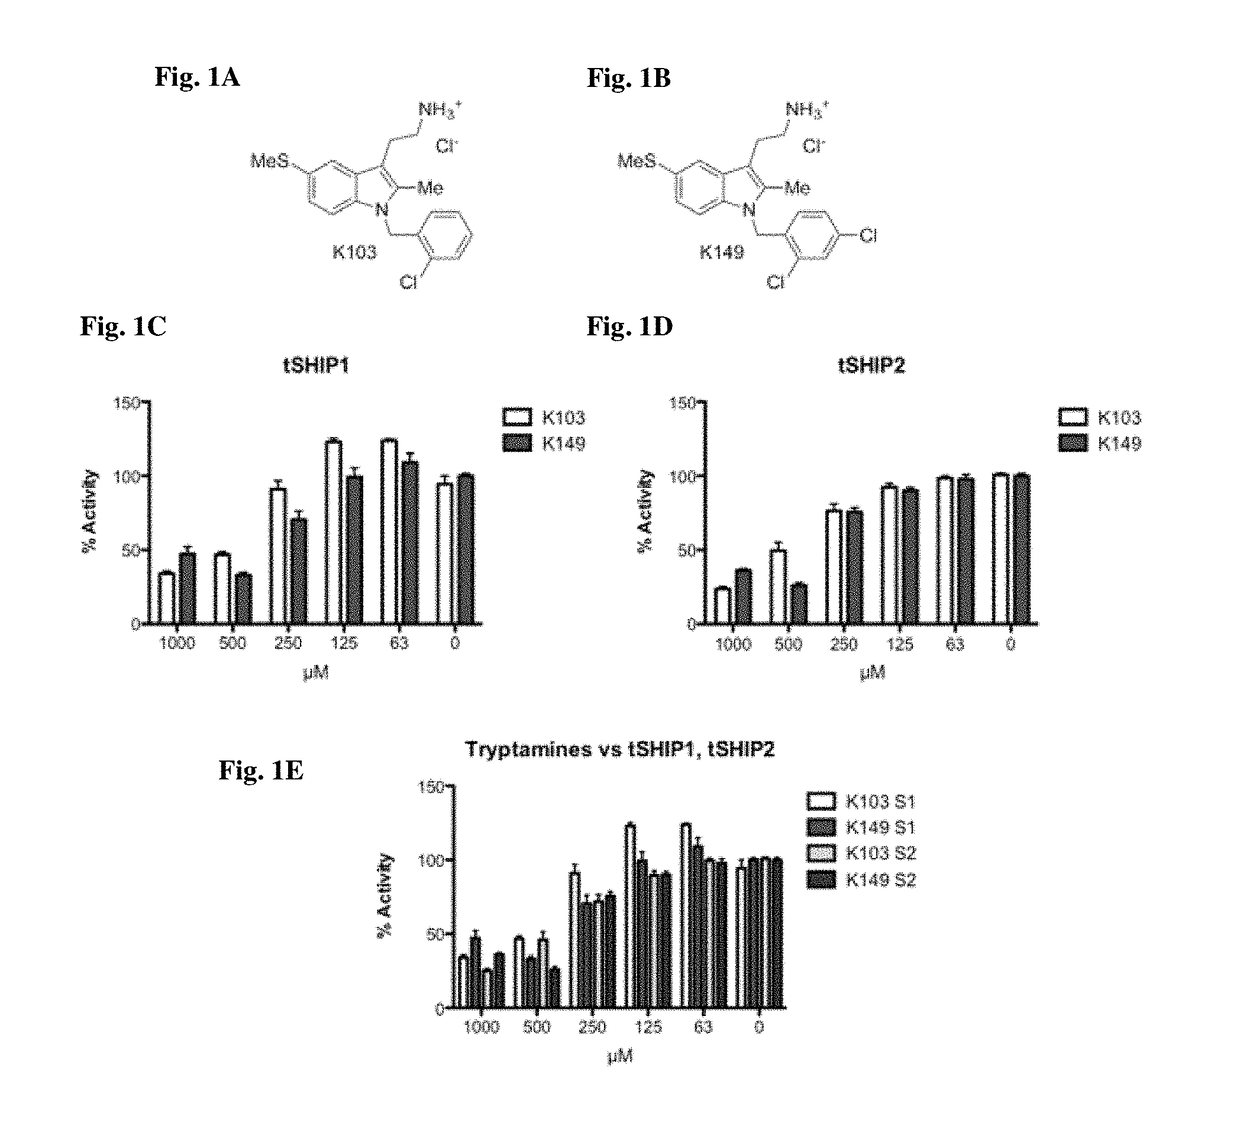 Tryptamine-based ship inhibitors for the treatment of cancer